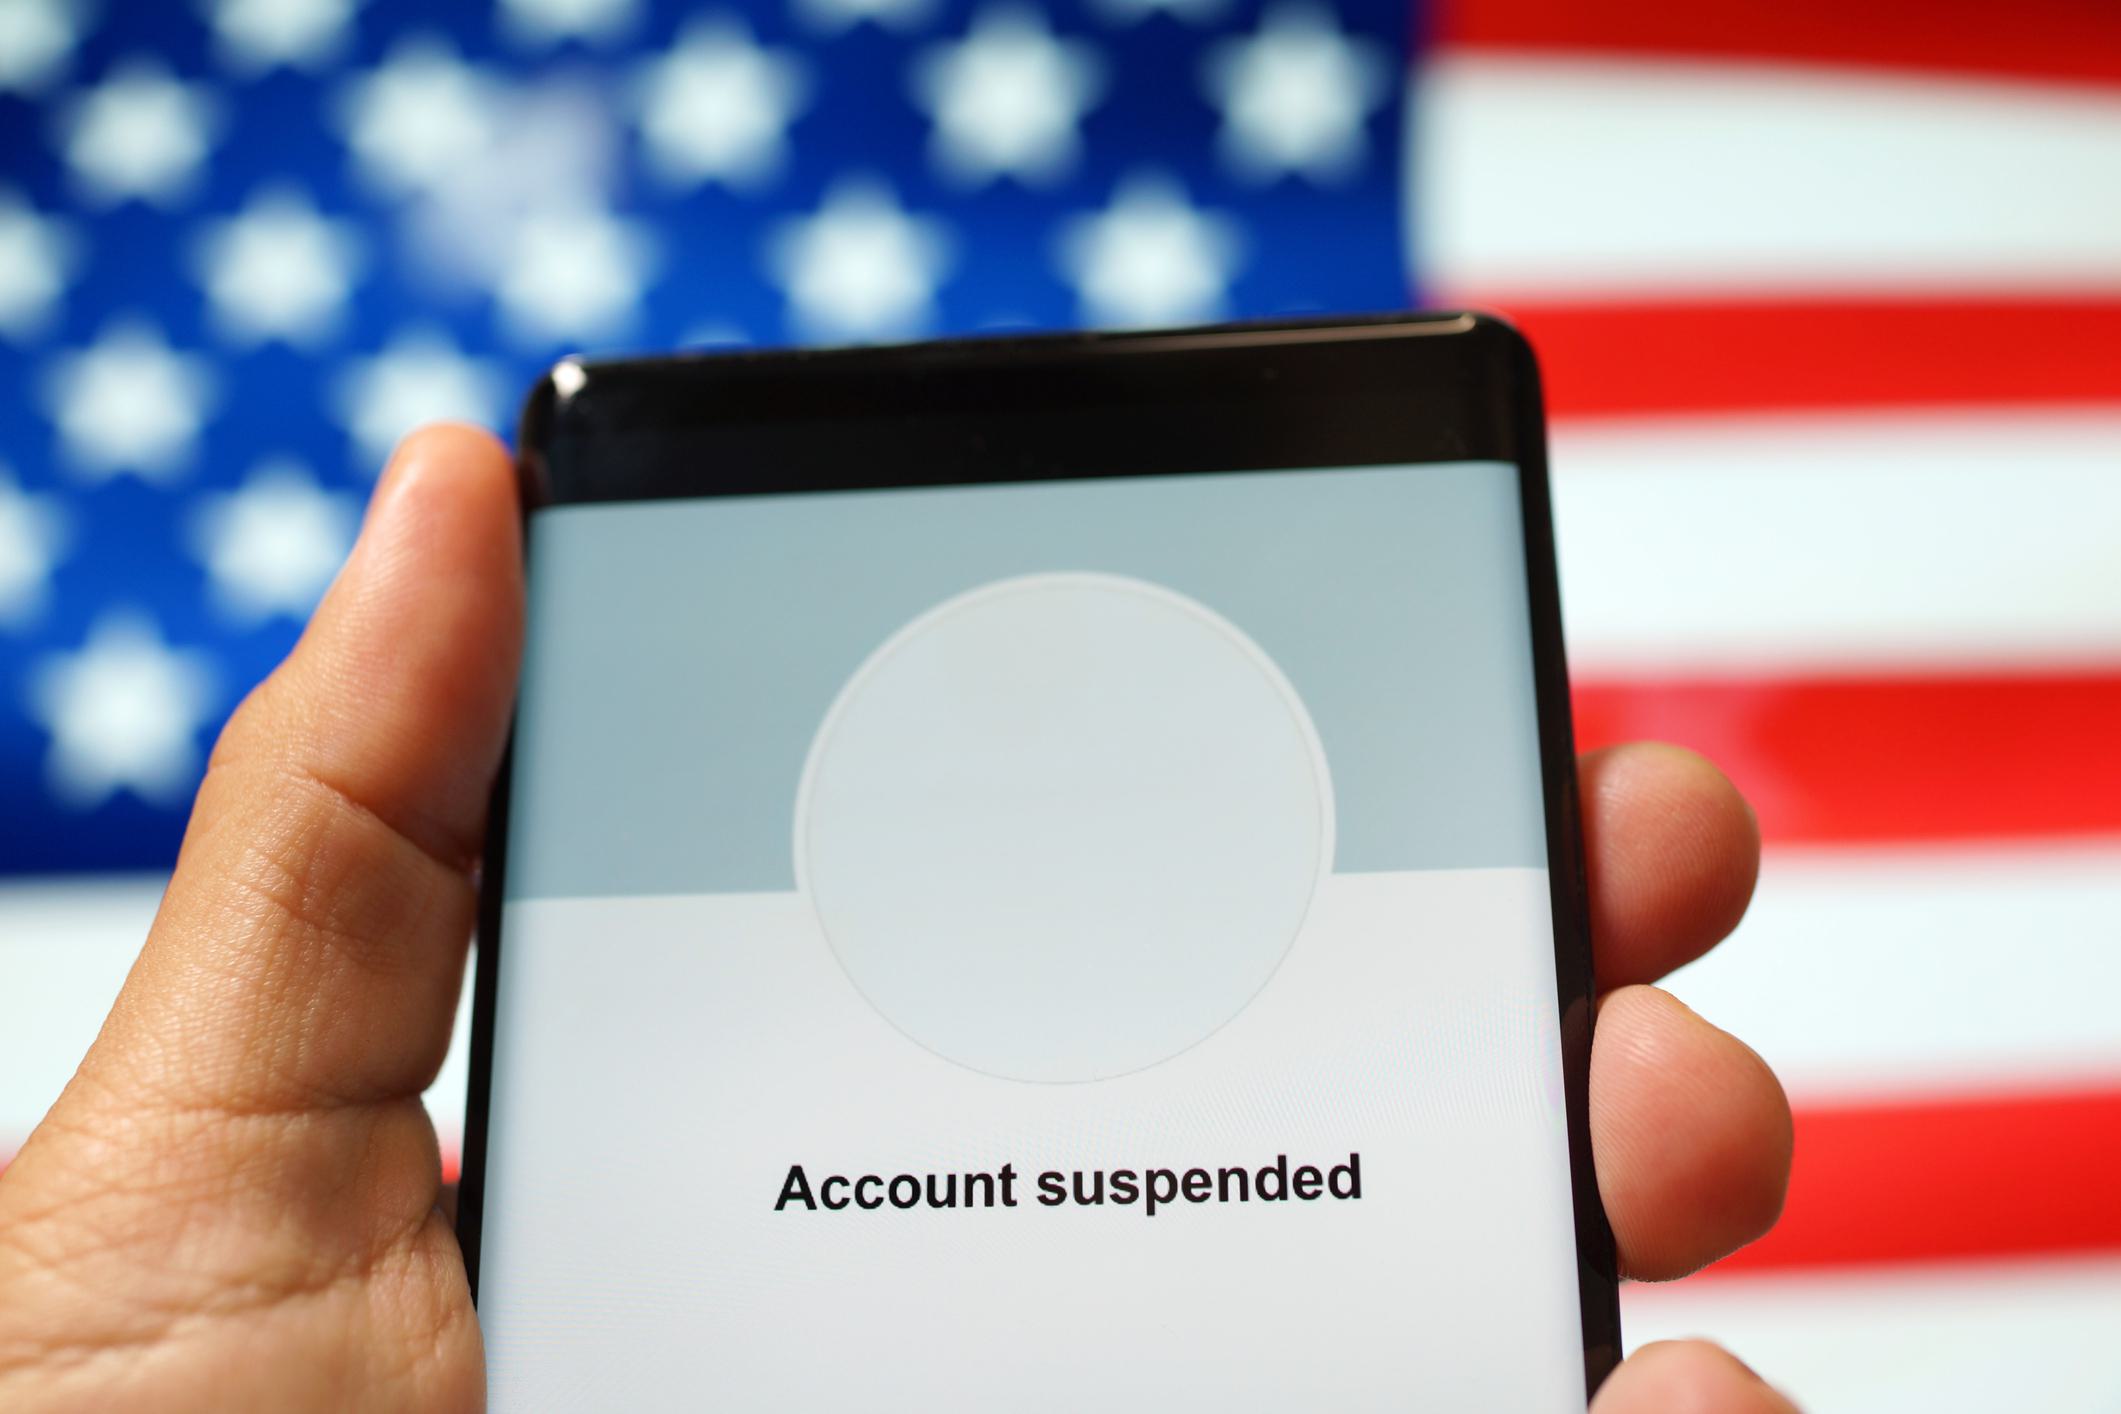 phone account suspended usa flag